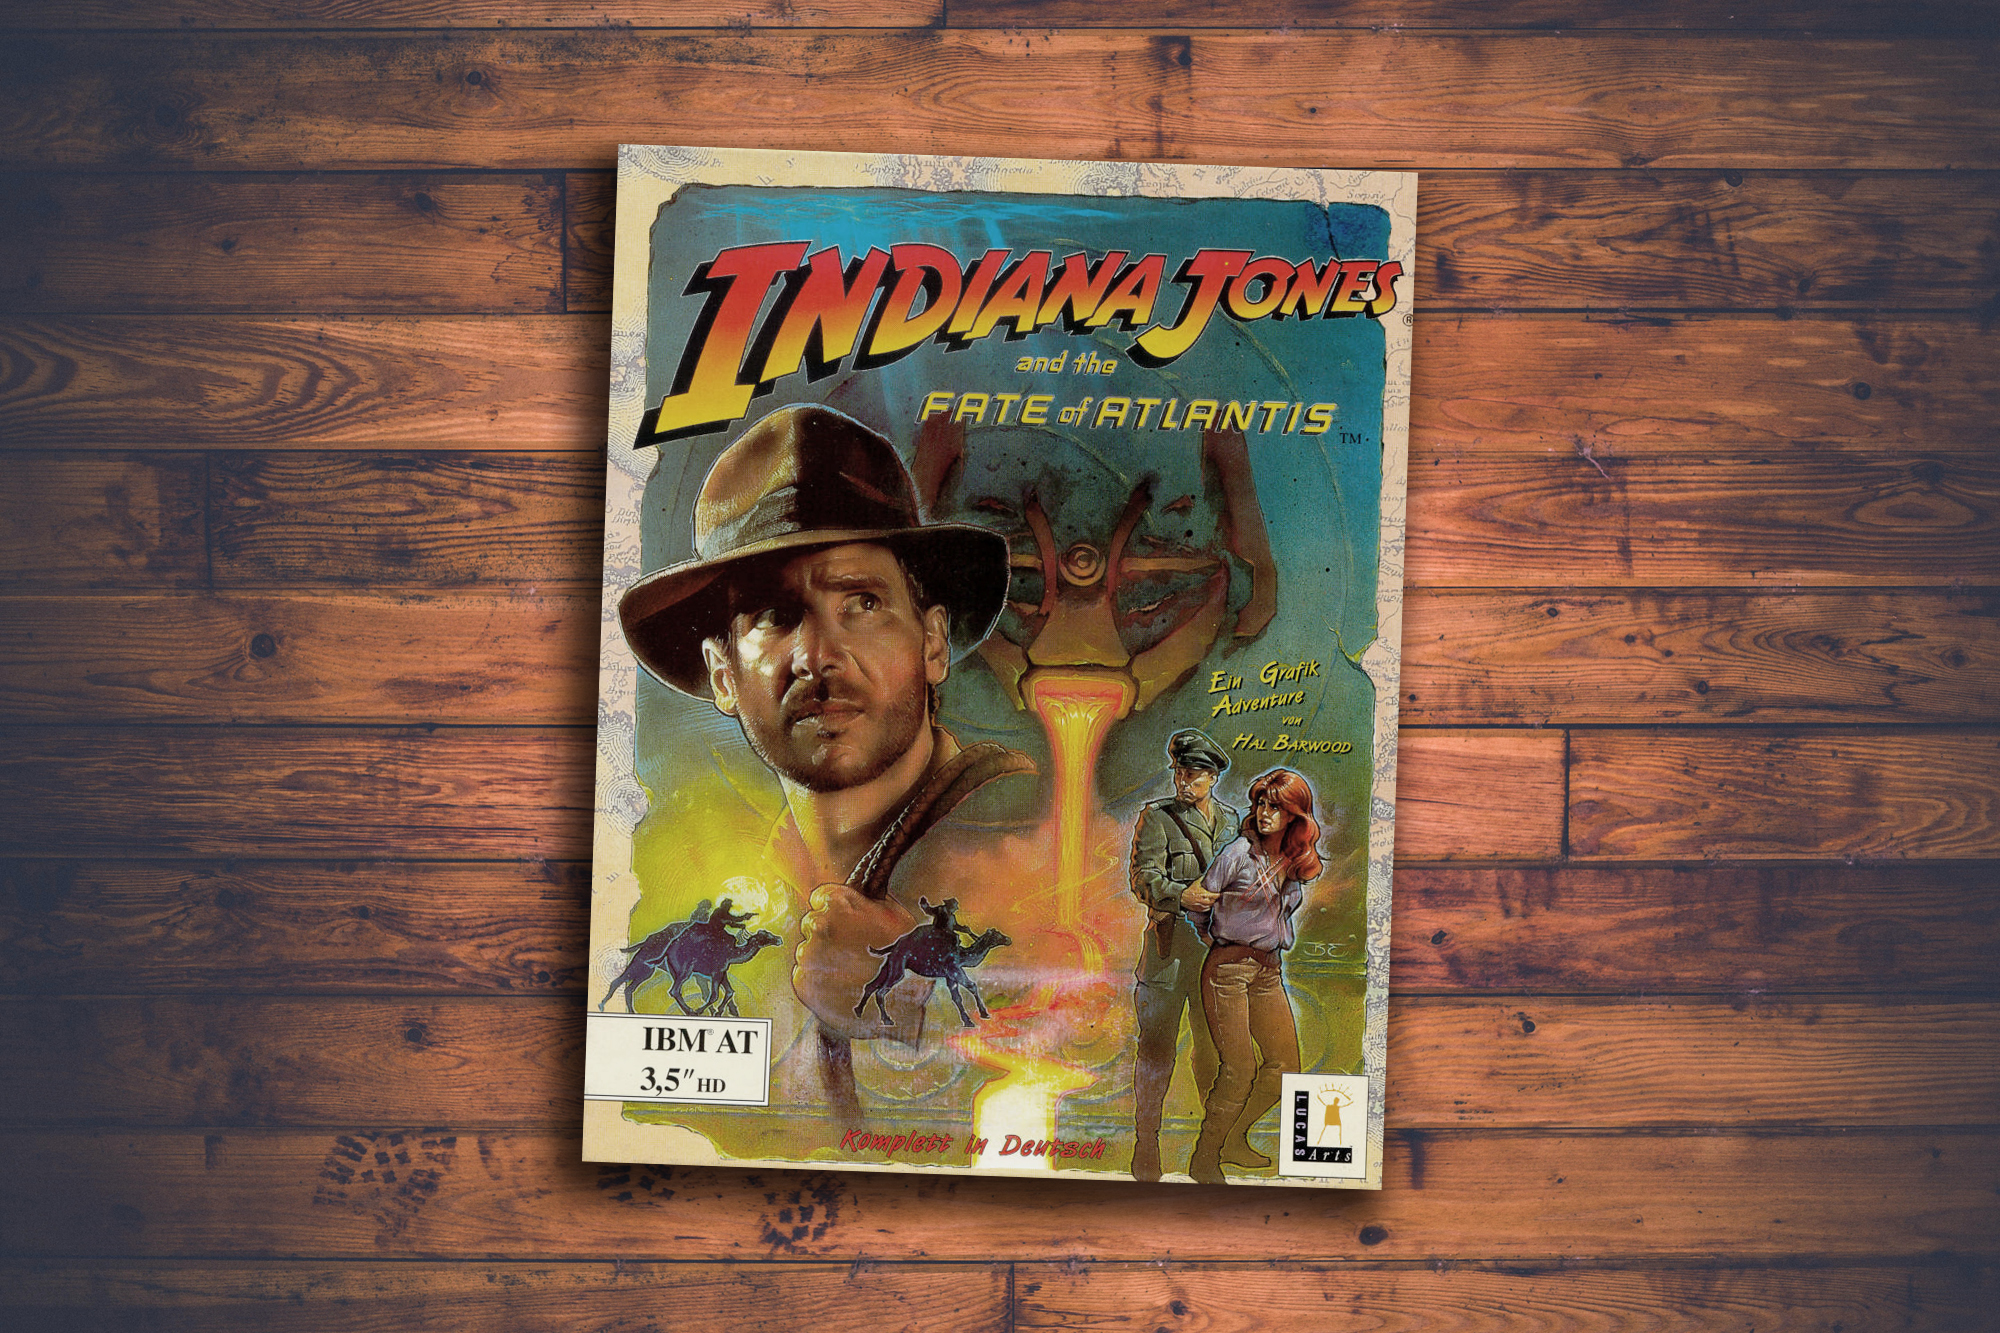 Box of the game "Indiana Jones and the Fate of Atlantis"